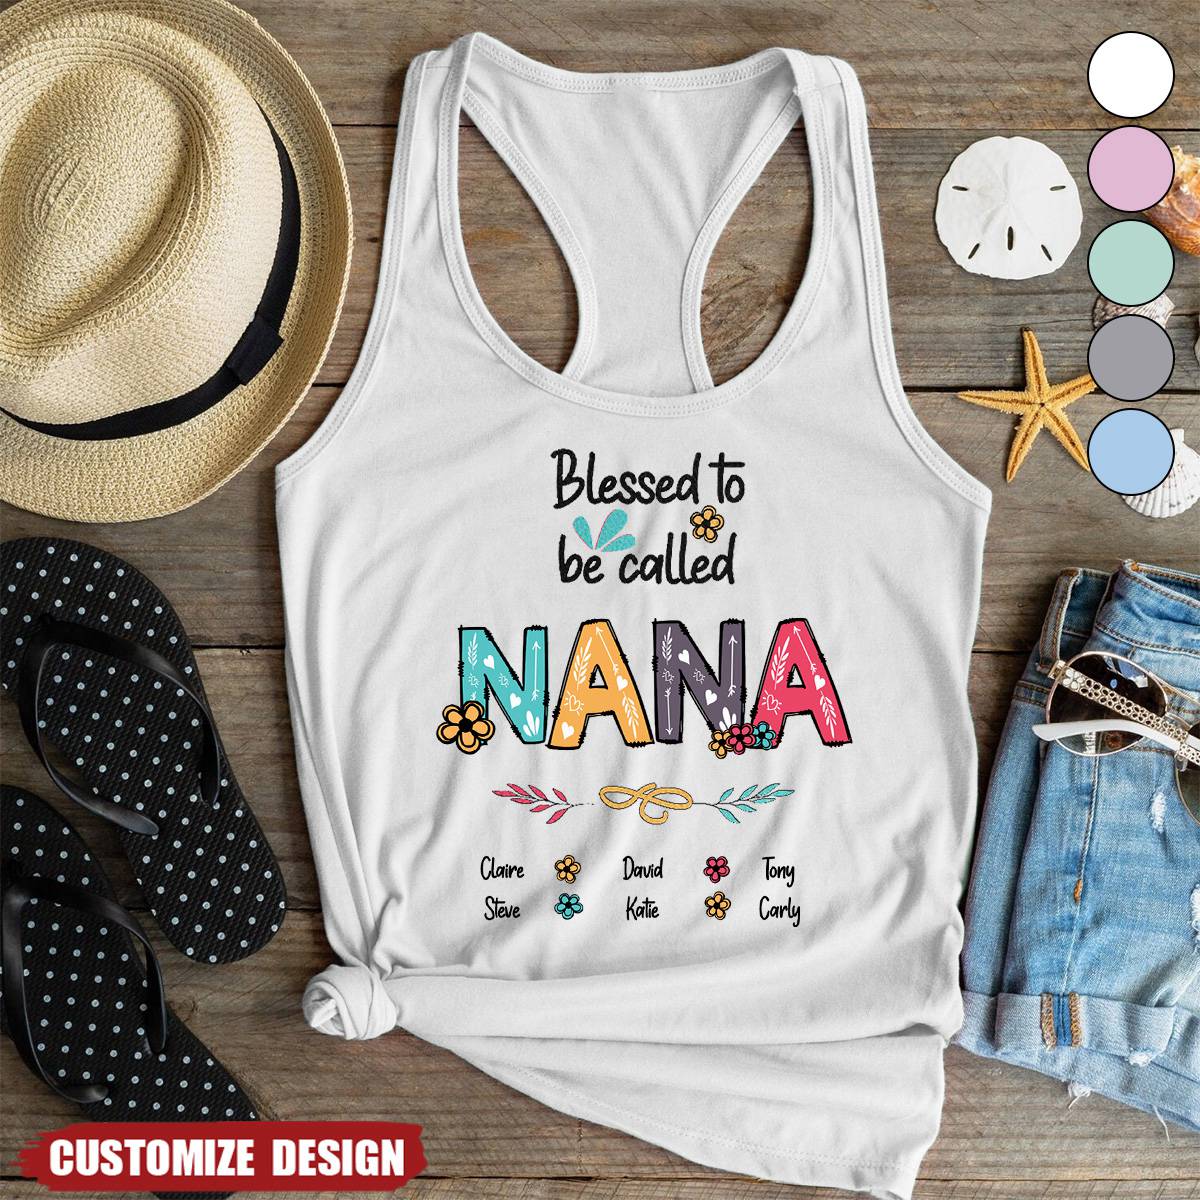 Blessed To Be Called Grandma - Personalized Racer Back Tank Top - Gift For Mom, Grandma